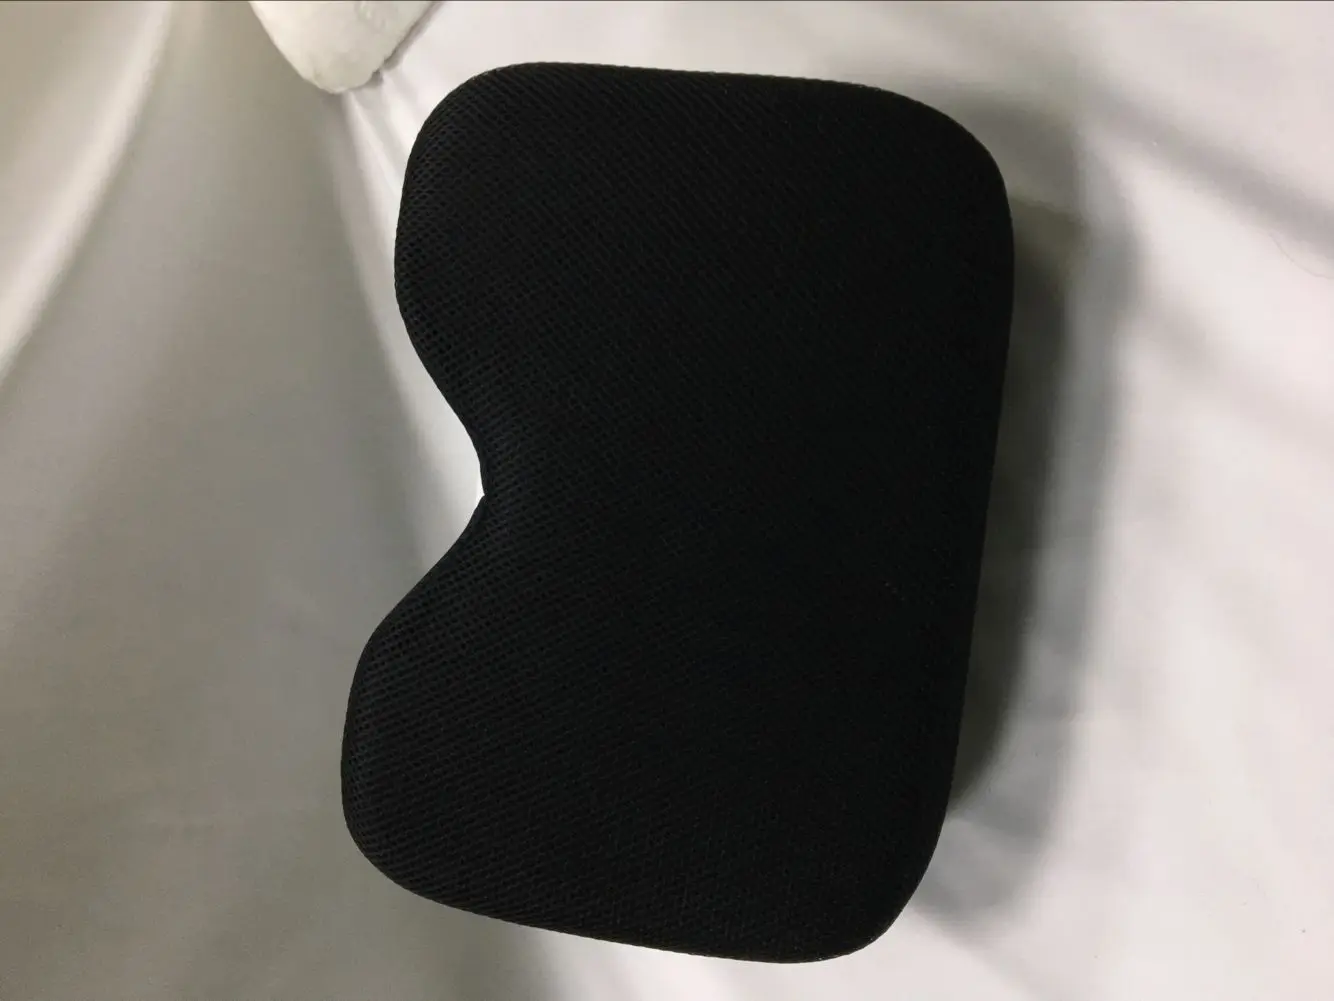 Home exercise seat cushion for rowing machine